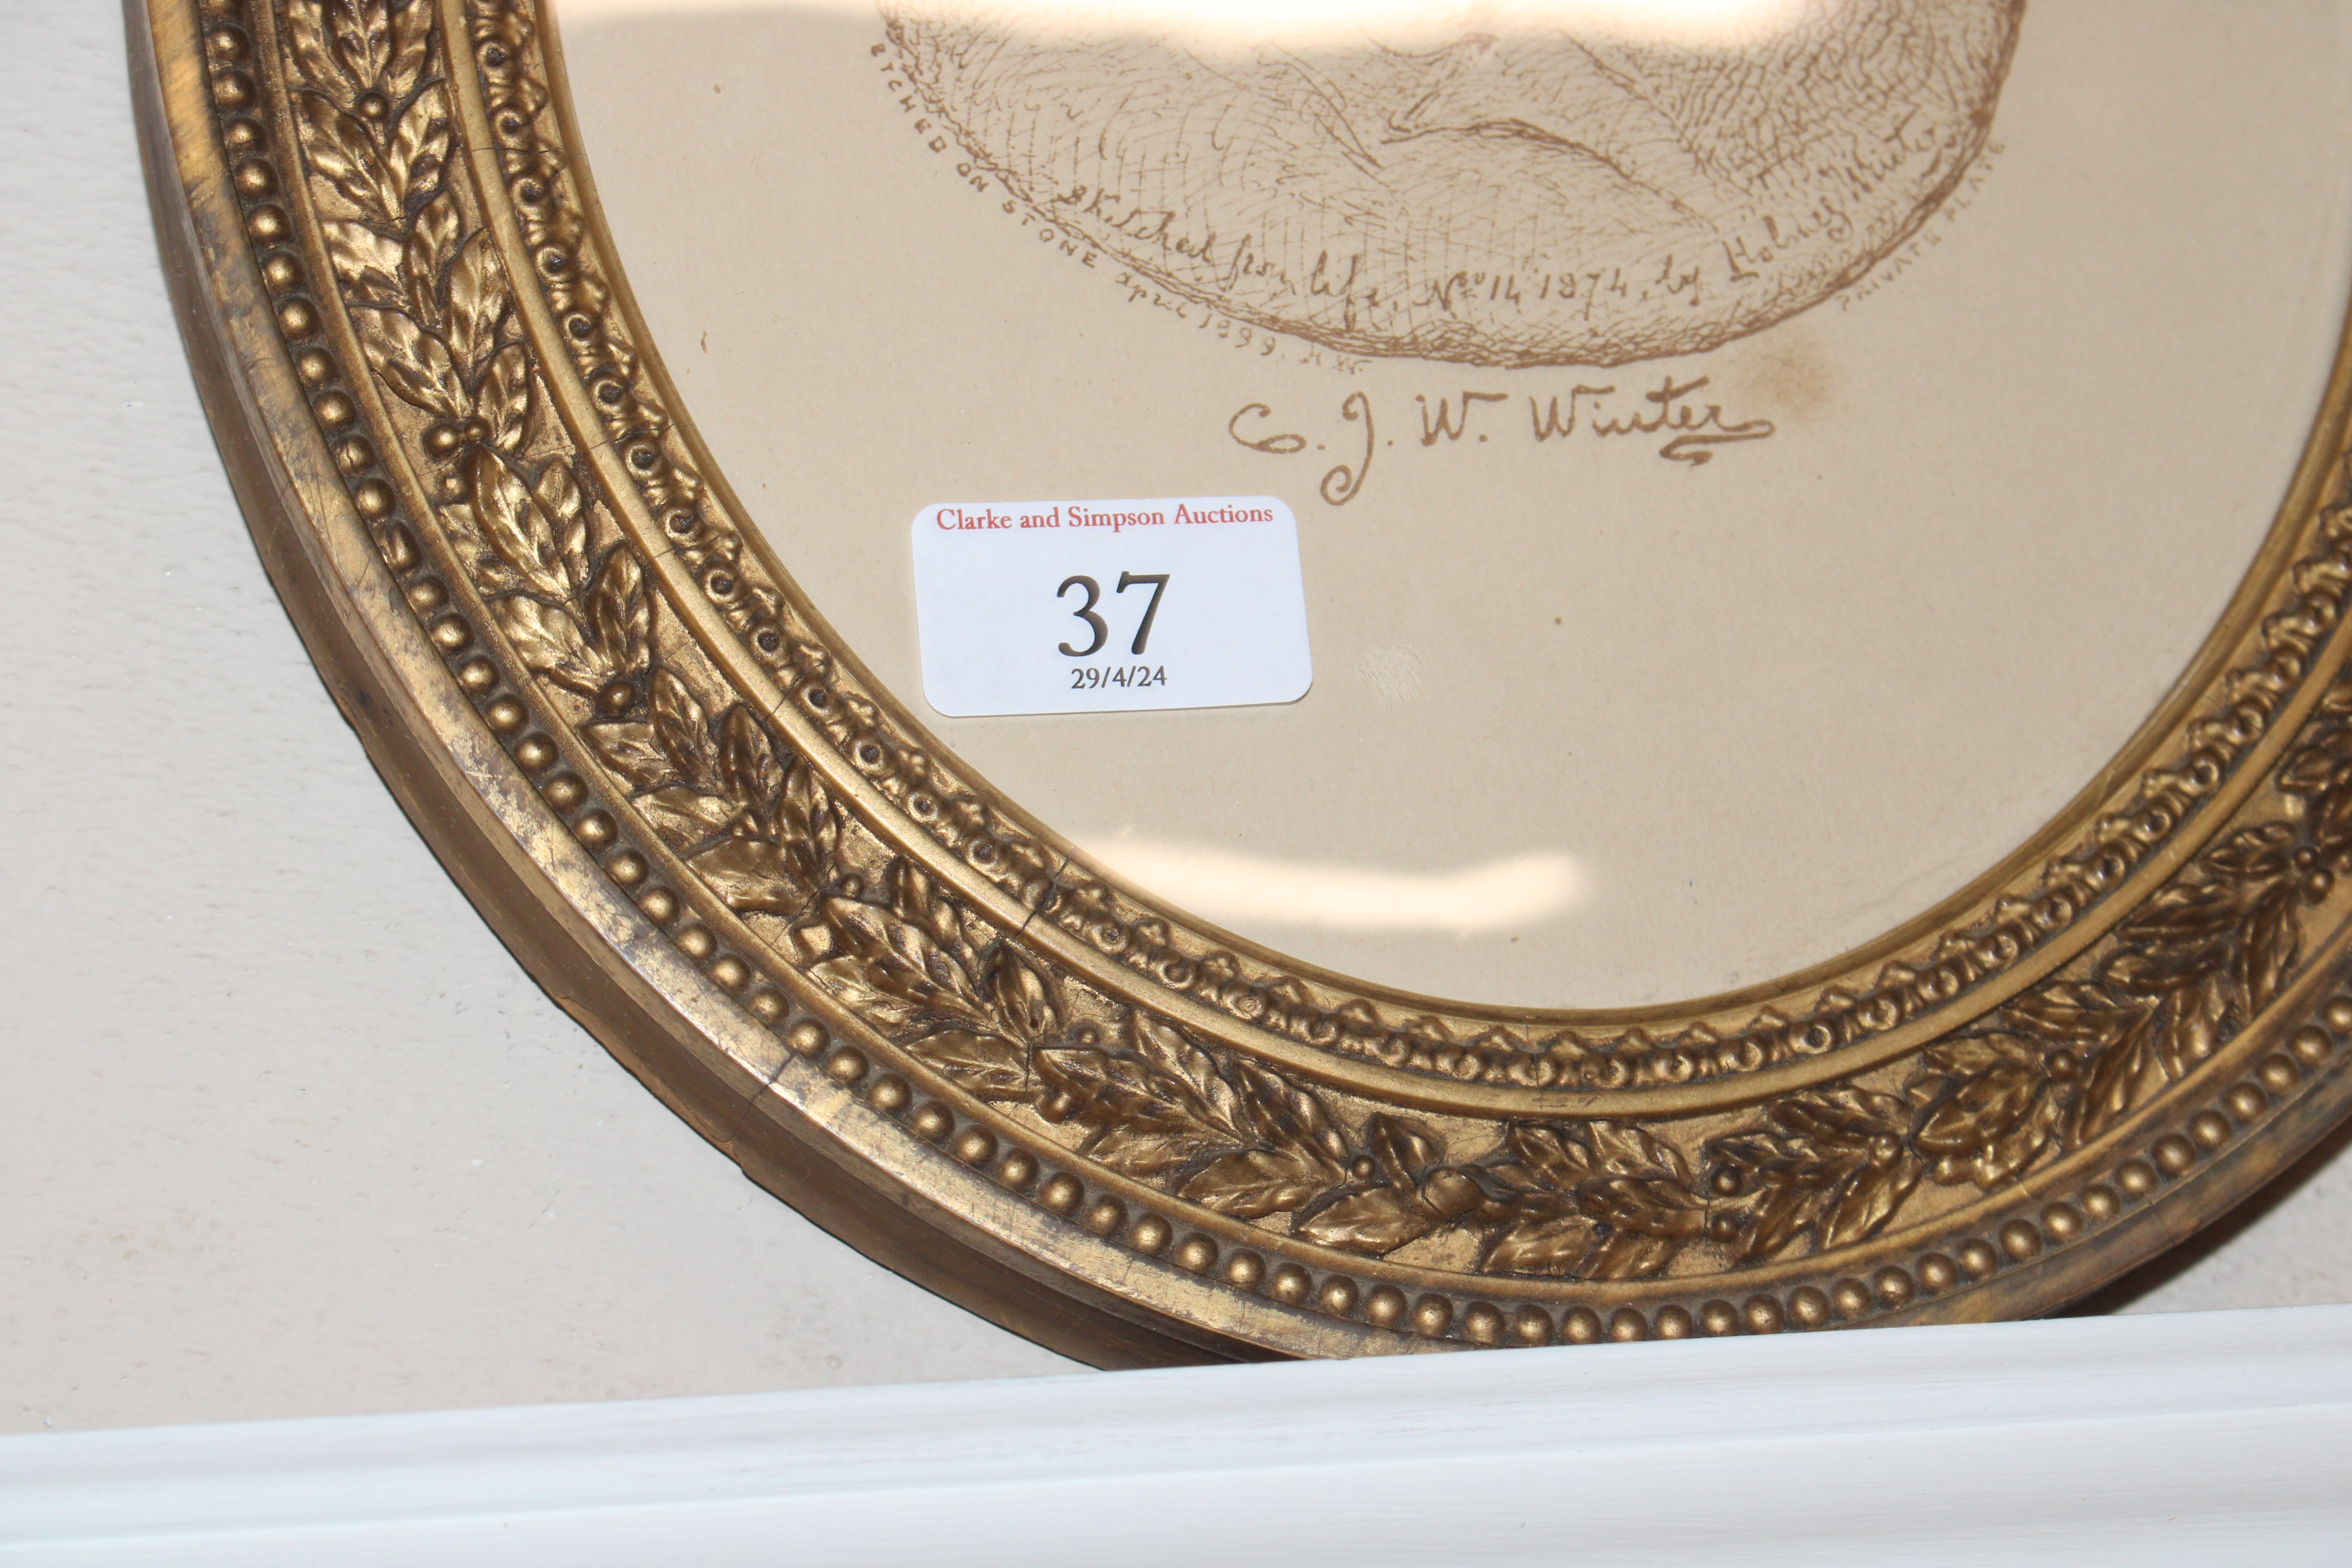 Oval framed lithograph after Holmes Winter in a de - Image 3 of 4